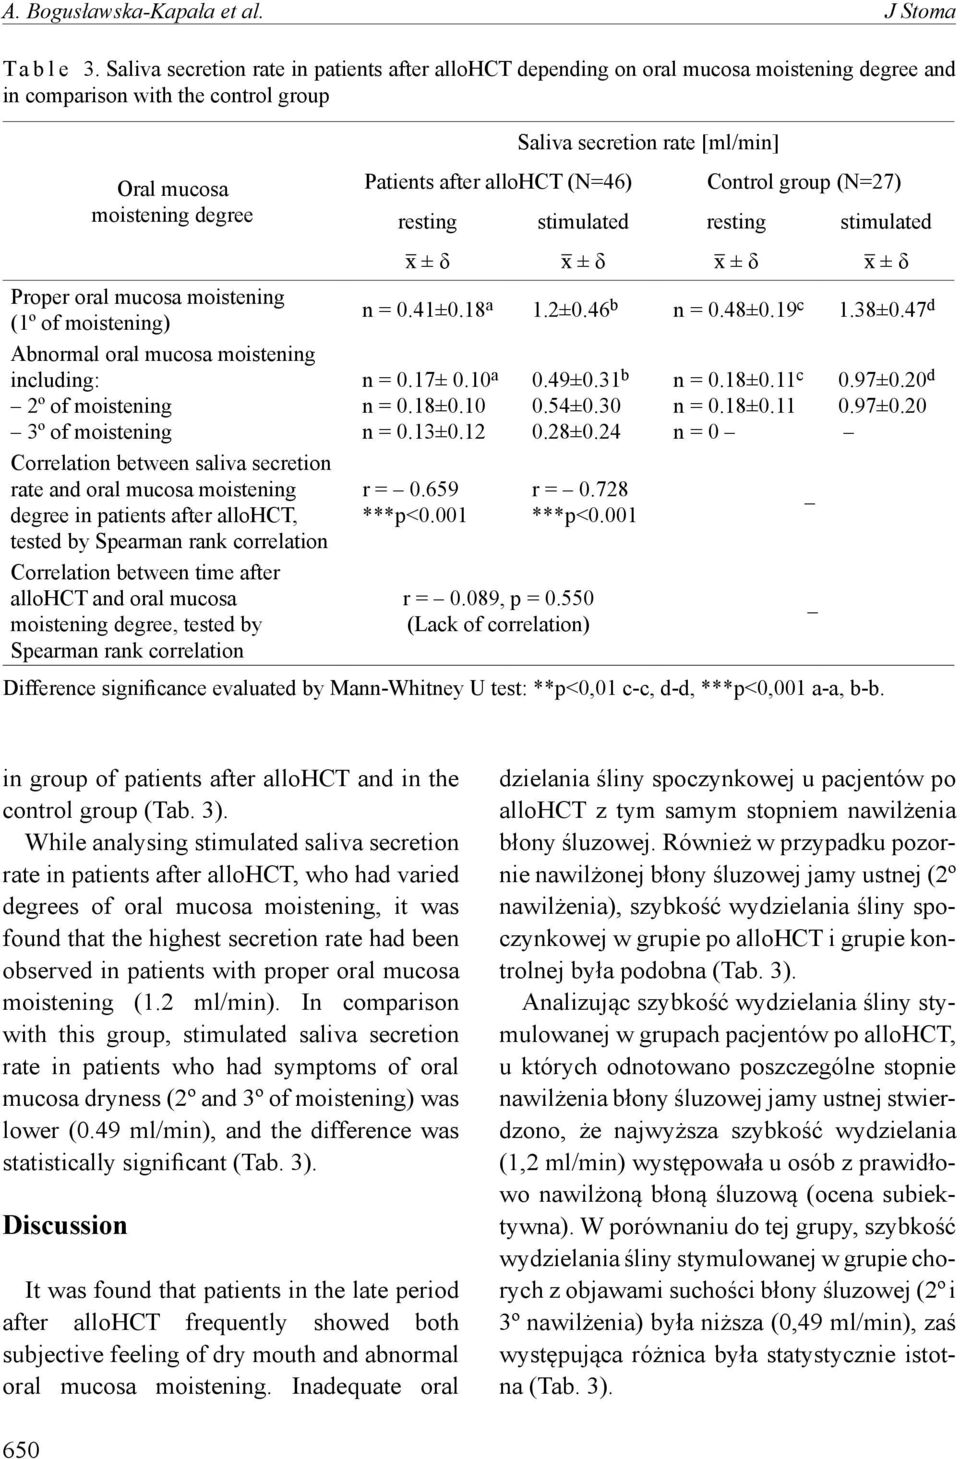 Patients after allohct (N=46) Control group (N=27) resting stimulated resting stimulated ± δ ± δ ± δ ± δ Proper oral mucosa moistening (1º of moistening) Abnormal oral mucosa moistening including: 2º